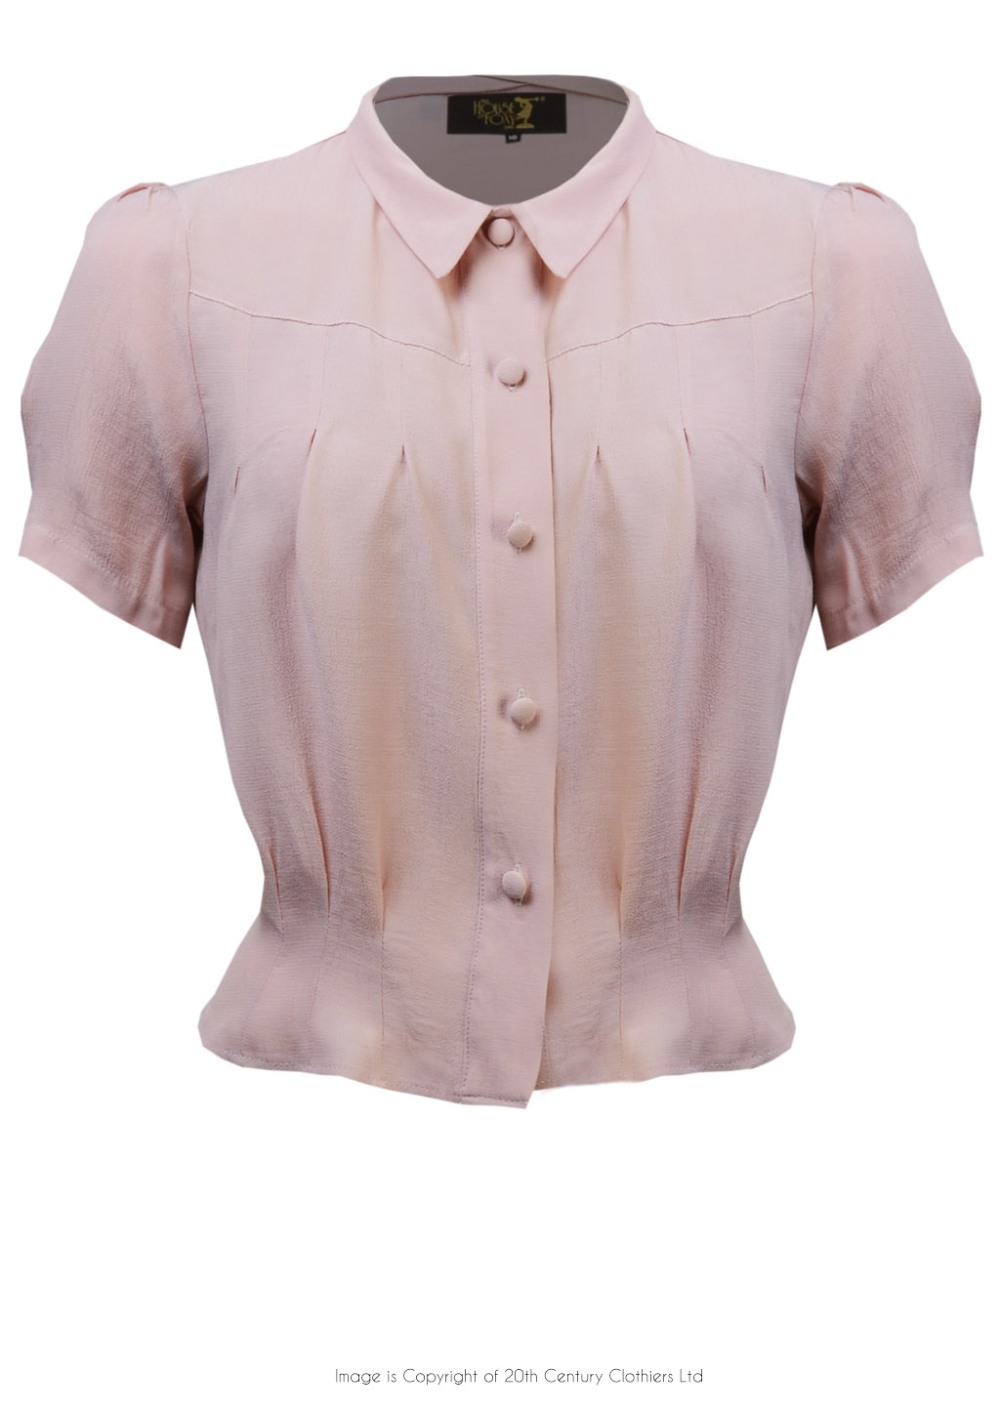 1930s Style 'Bonnie' Blouse in Blush Crepe - 1930s Style 'Bonnie' Blouse in Blush Crepe -   18 style Feminino vintage ideas